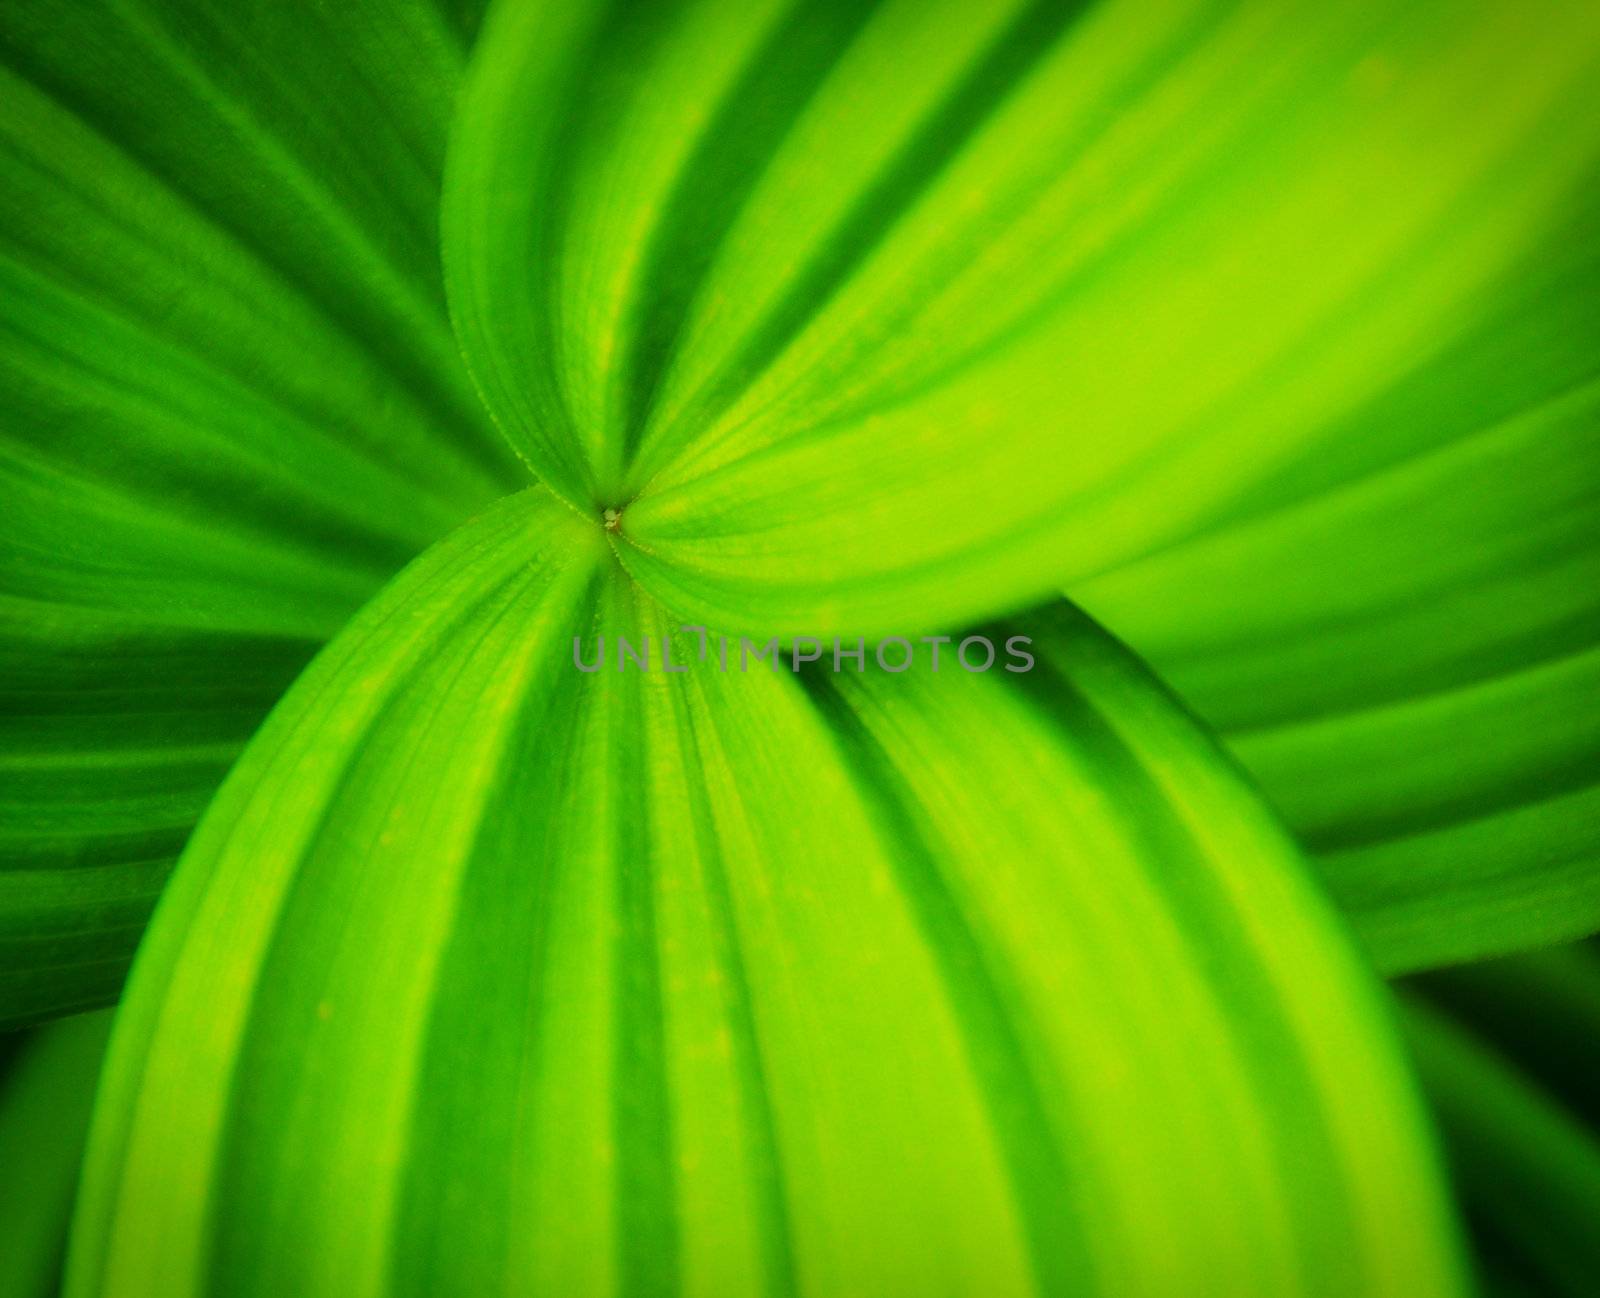 Green big leaves with leading lines by martinm303